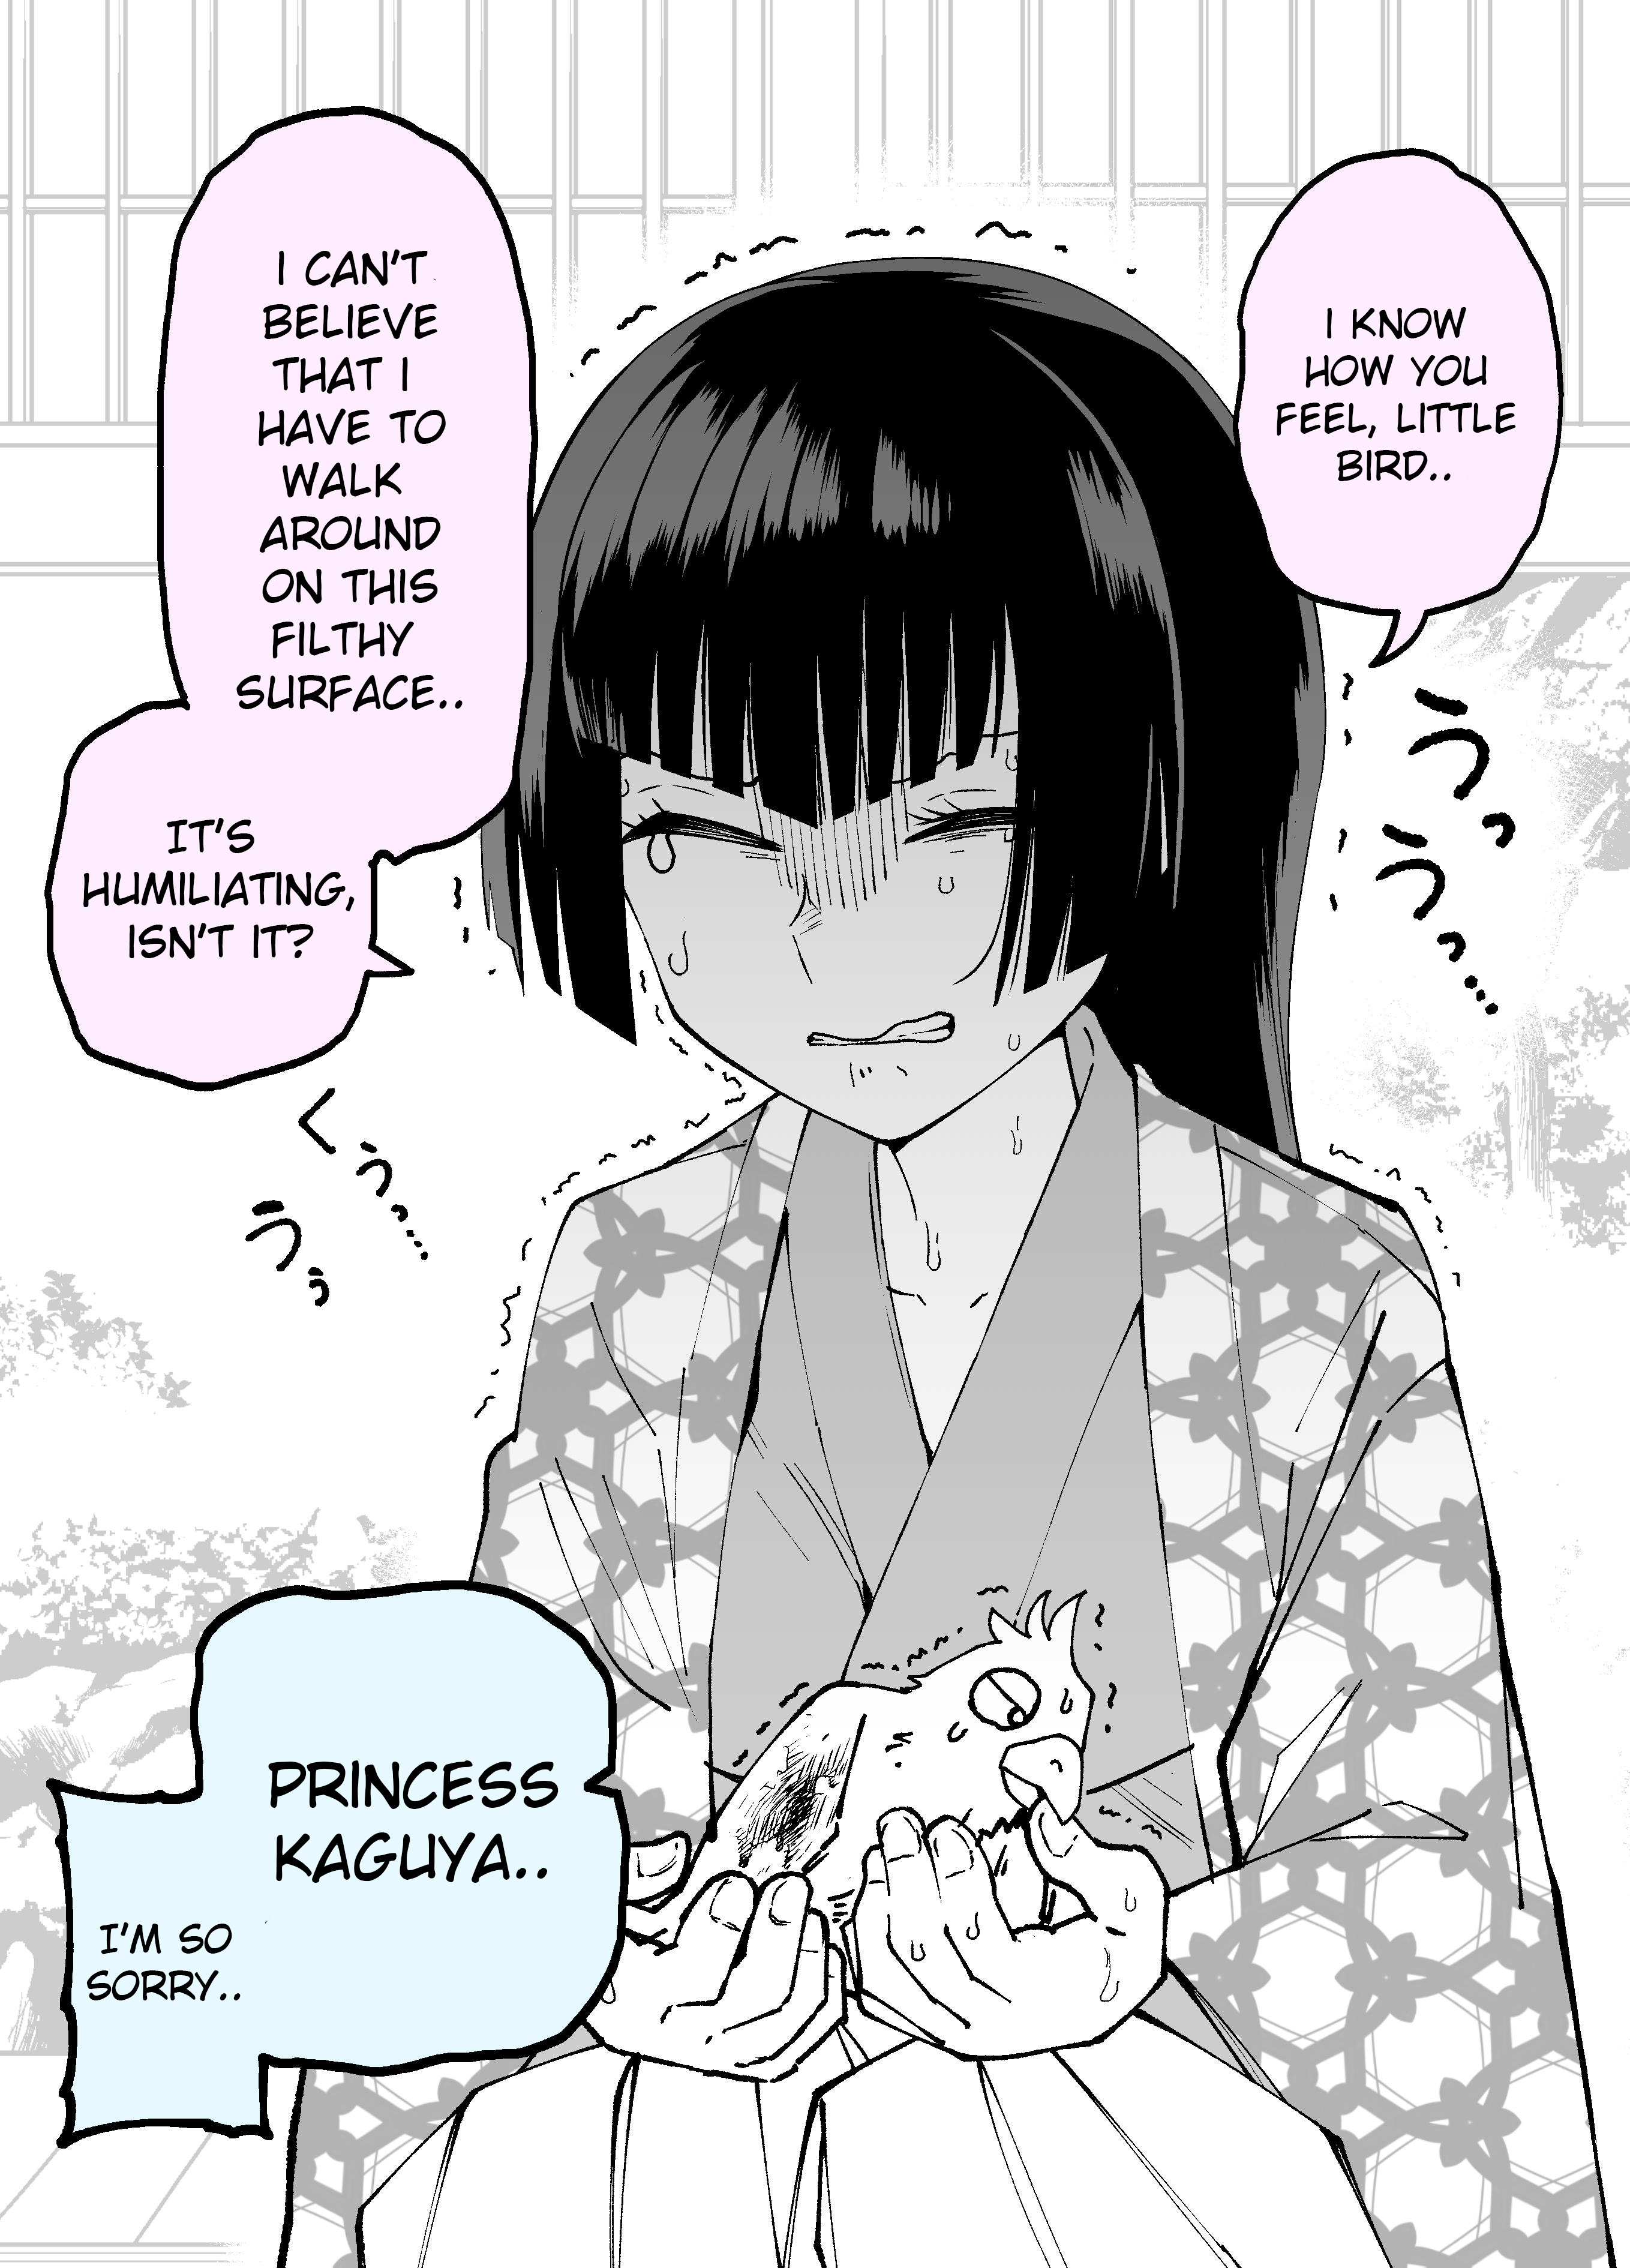 Princess Kaguya Will Return To The Moon In 10 Days - Page 2